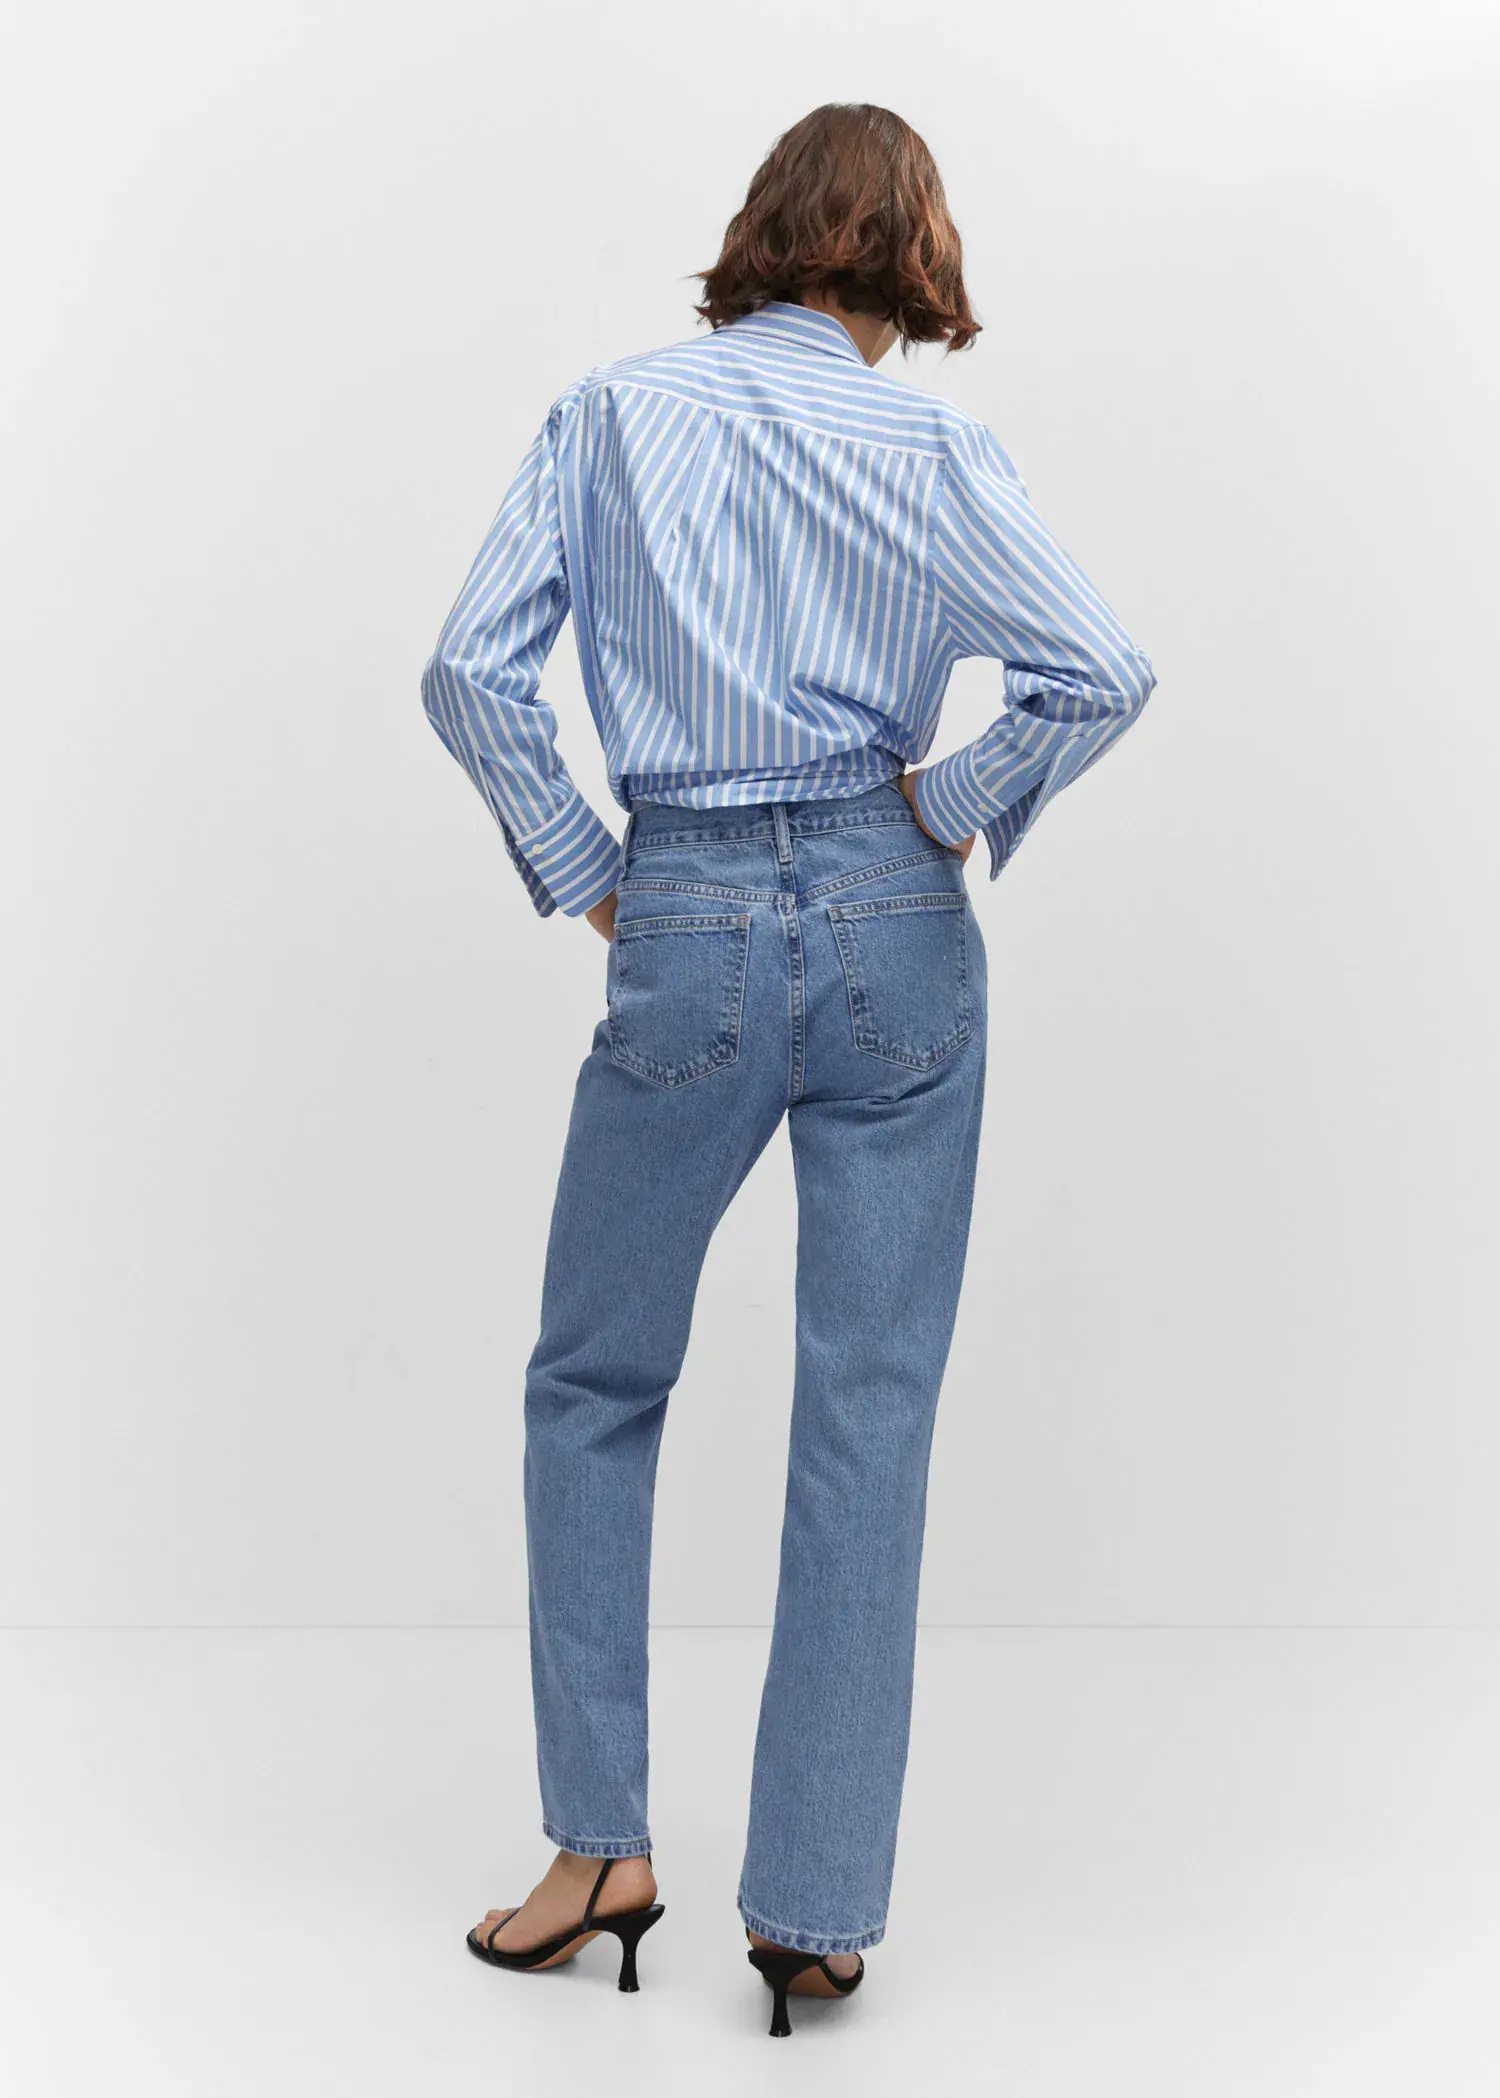 Mango Mid-rise straight jeans. a woman wearing a striped shirt and blue jeans. 